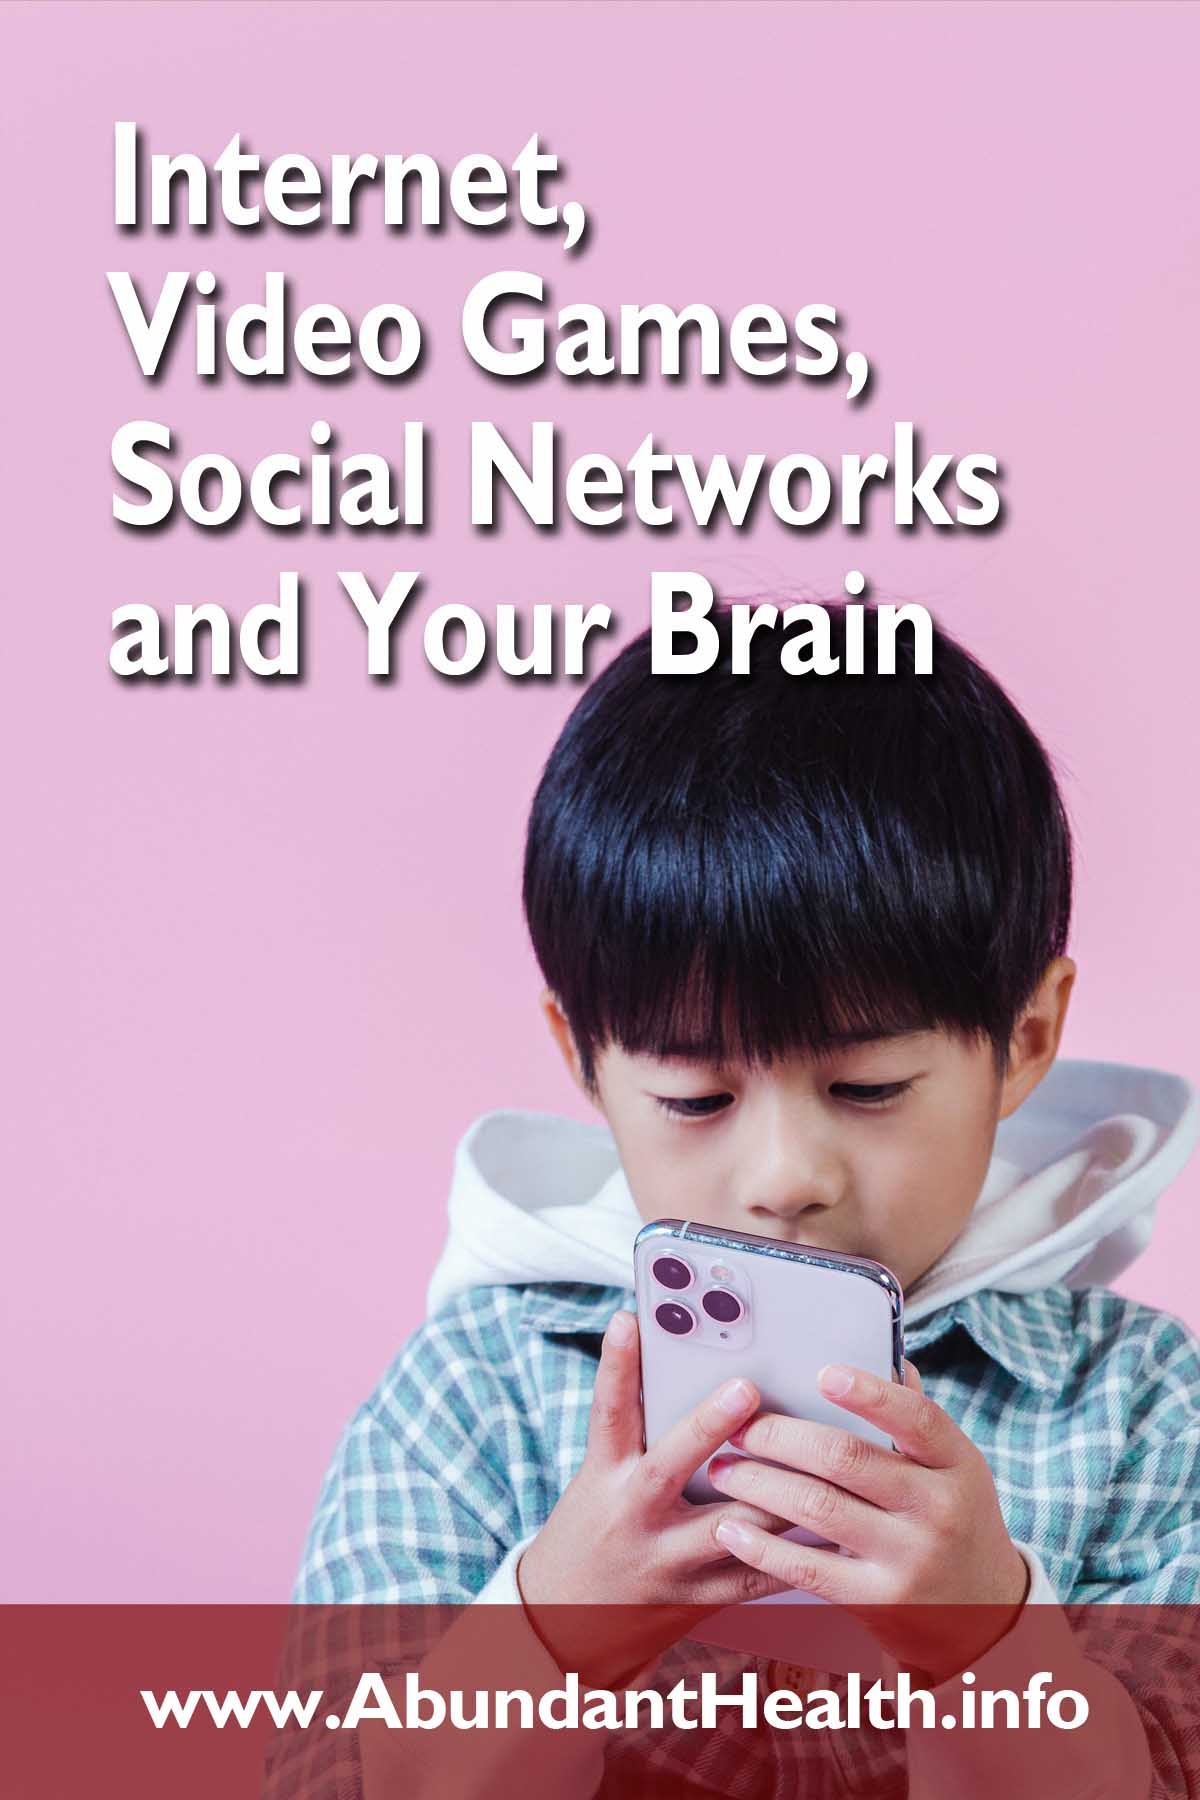 Internet, Video Games, Social Networks and Your Brain